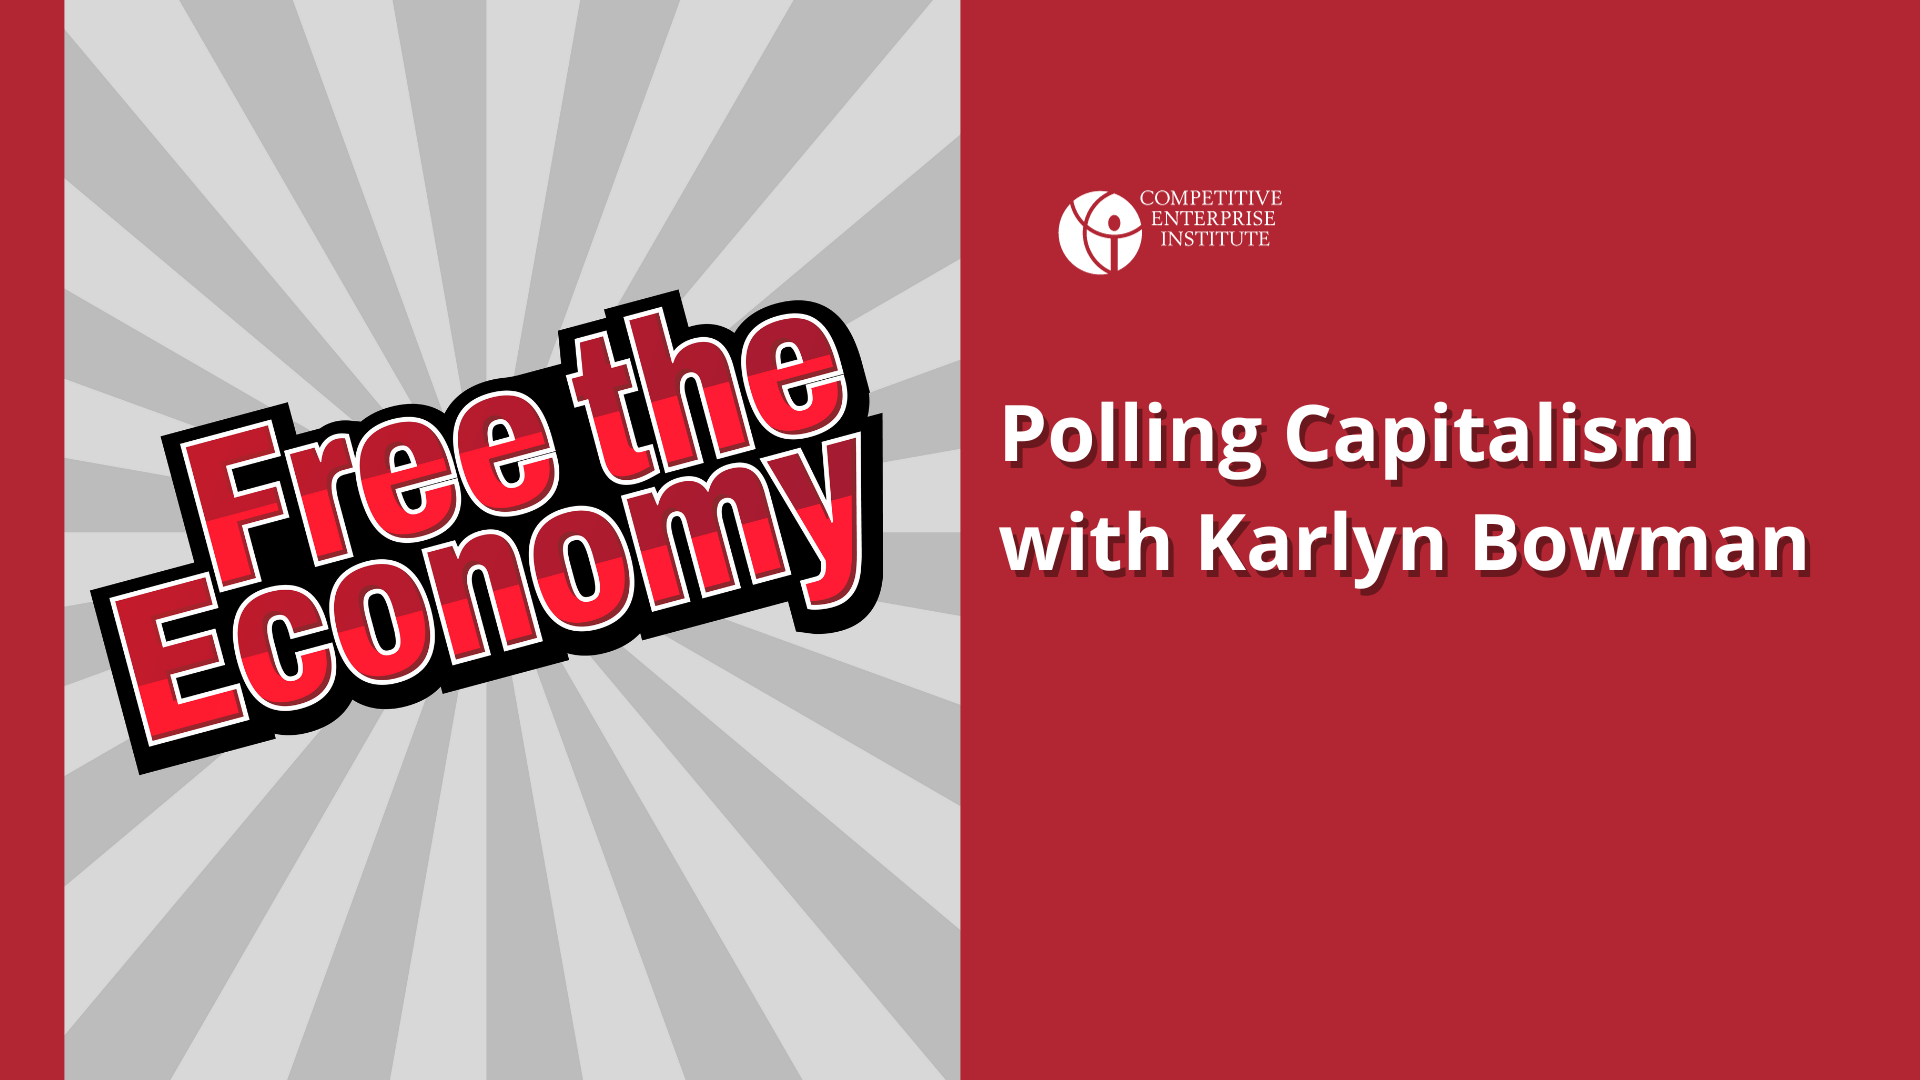 Polling Capitalism with Karlyn Bowman